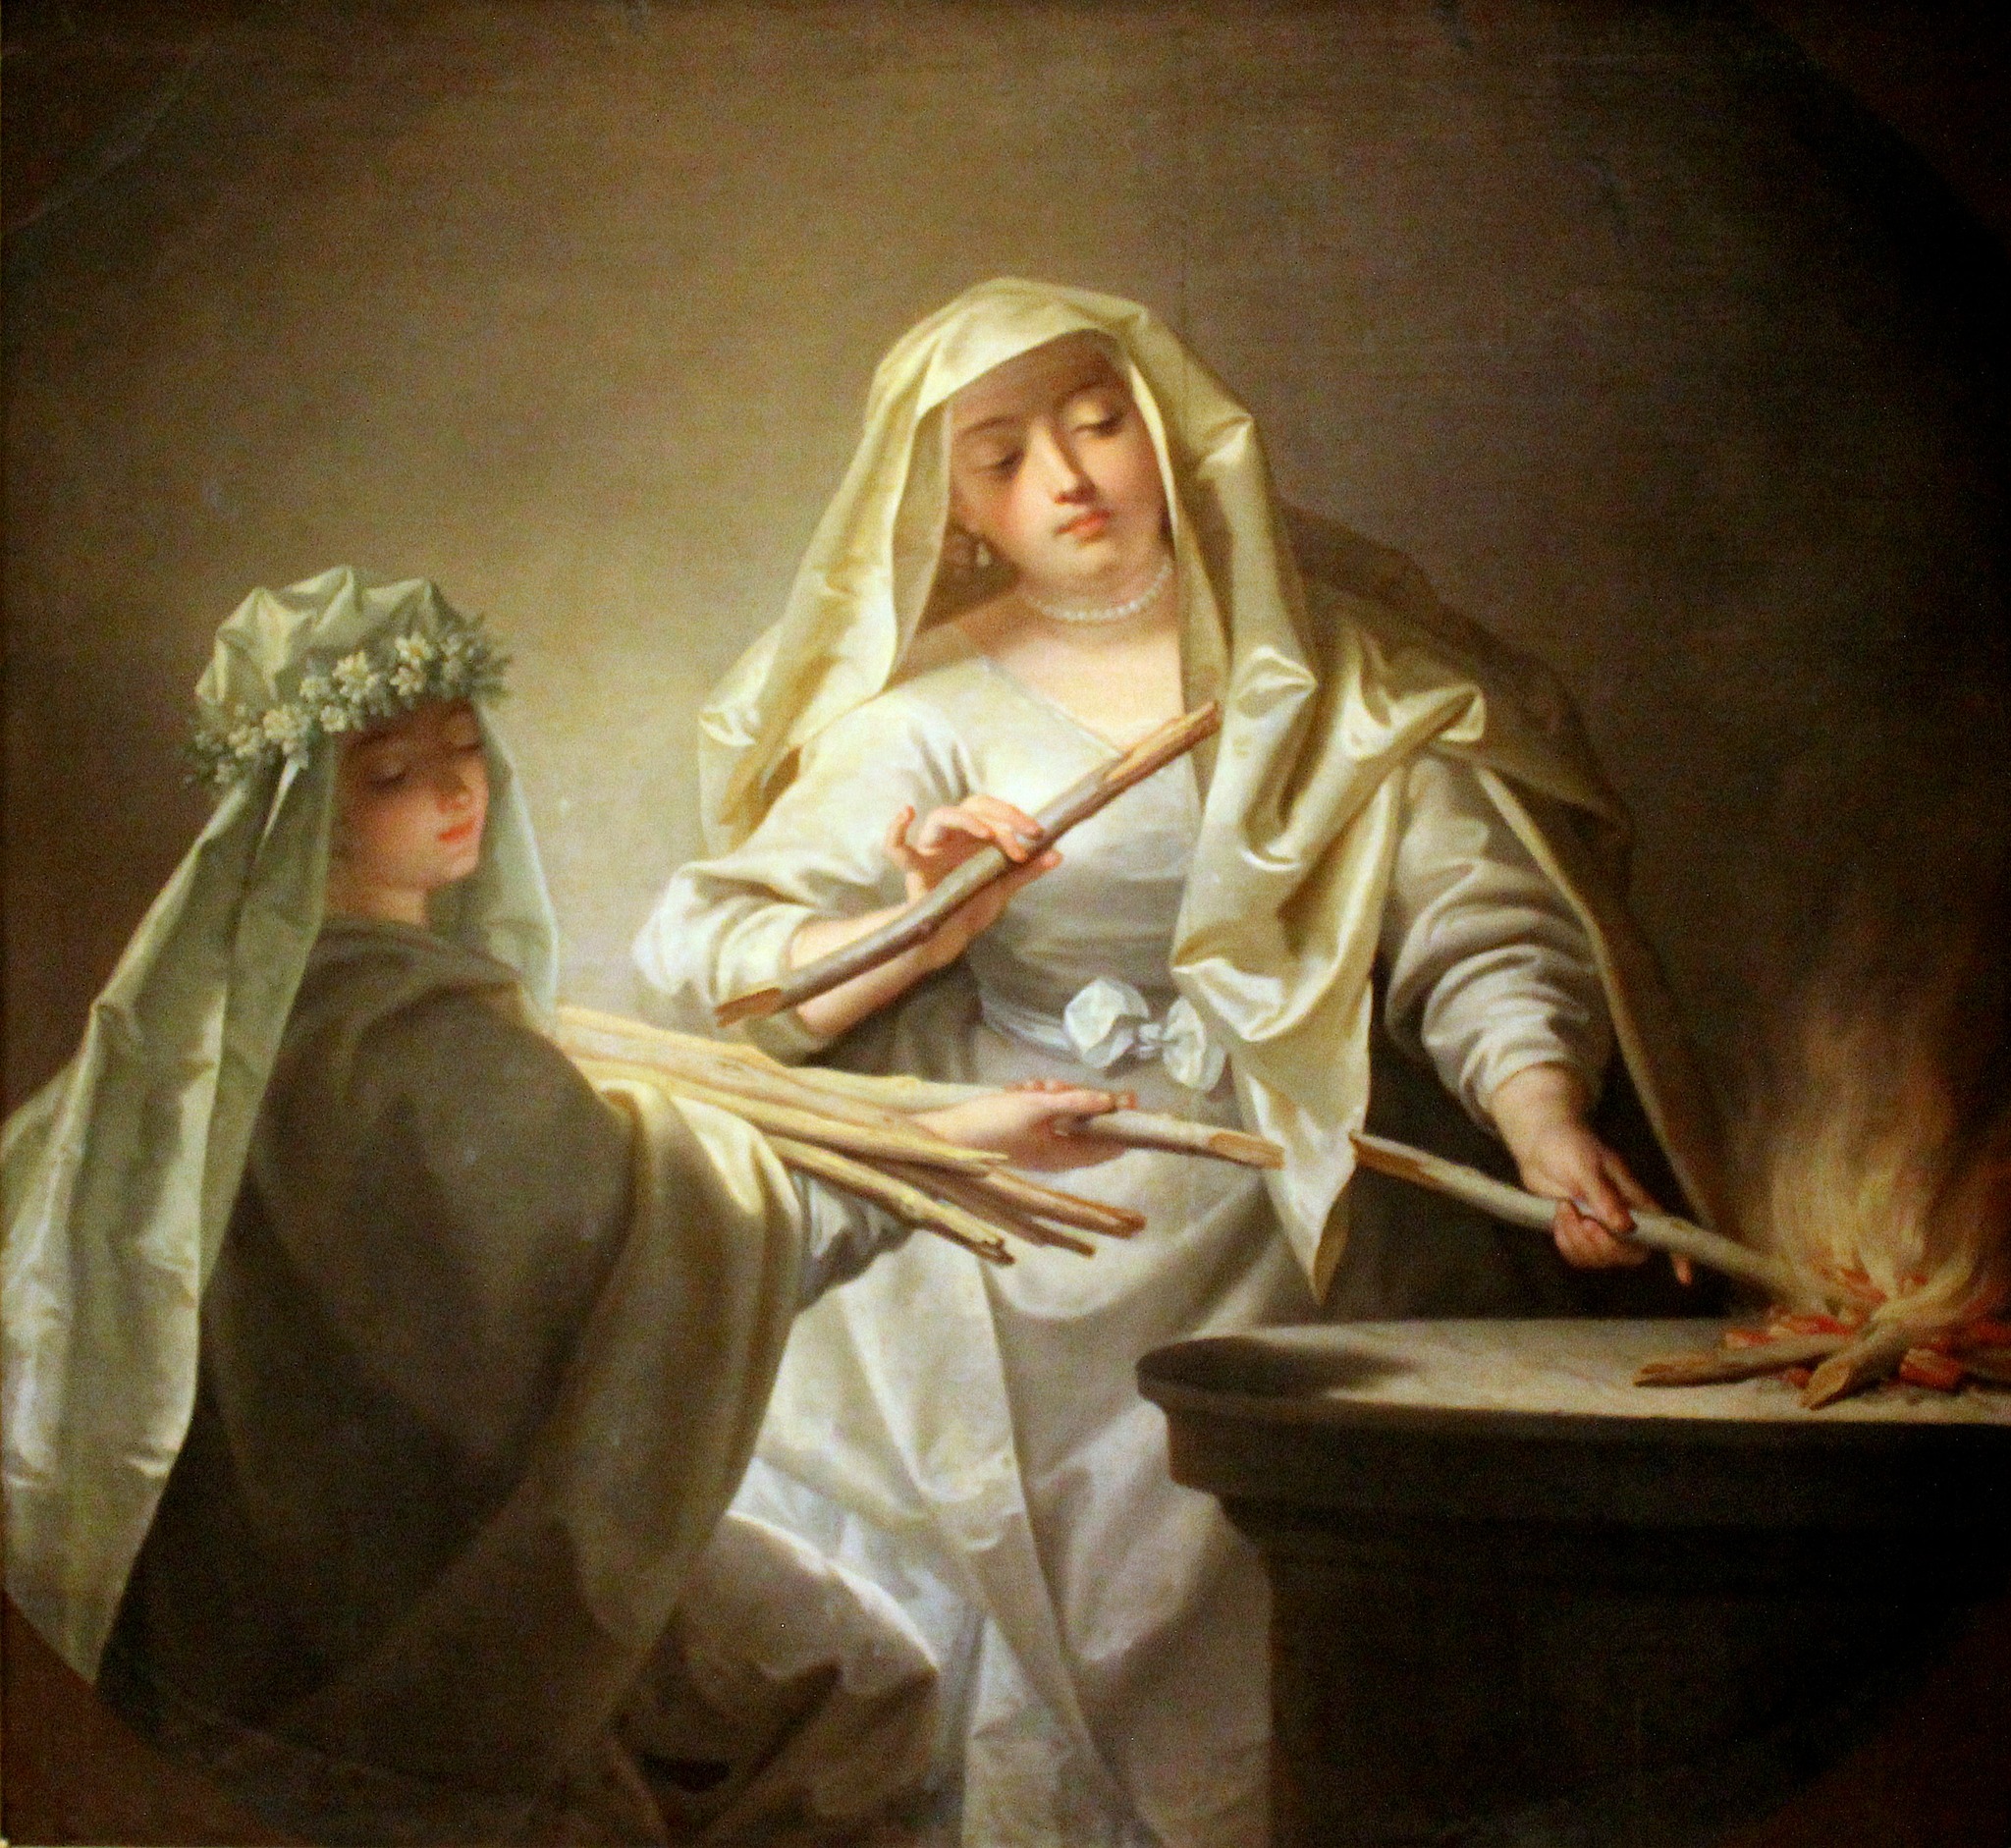 Virgins at the hearth fire of the Goddess Vesta